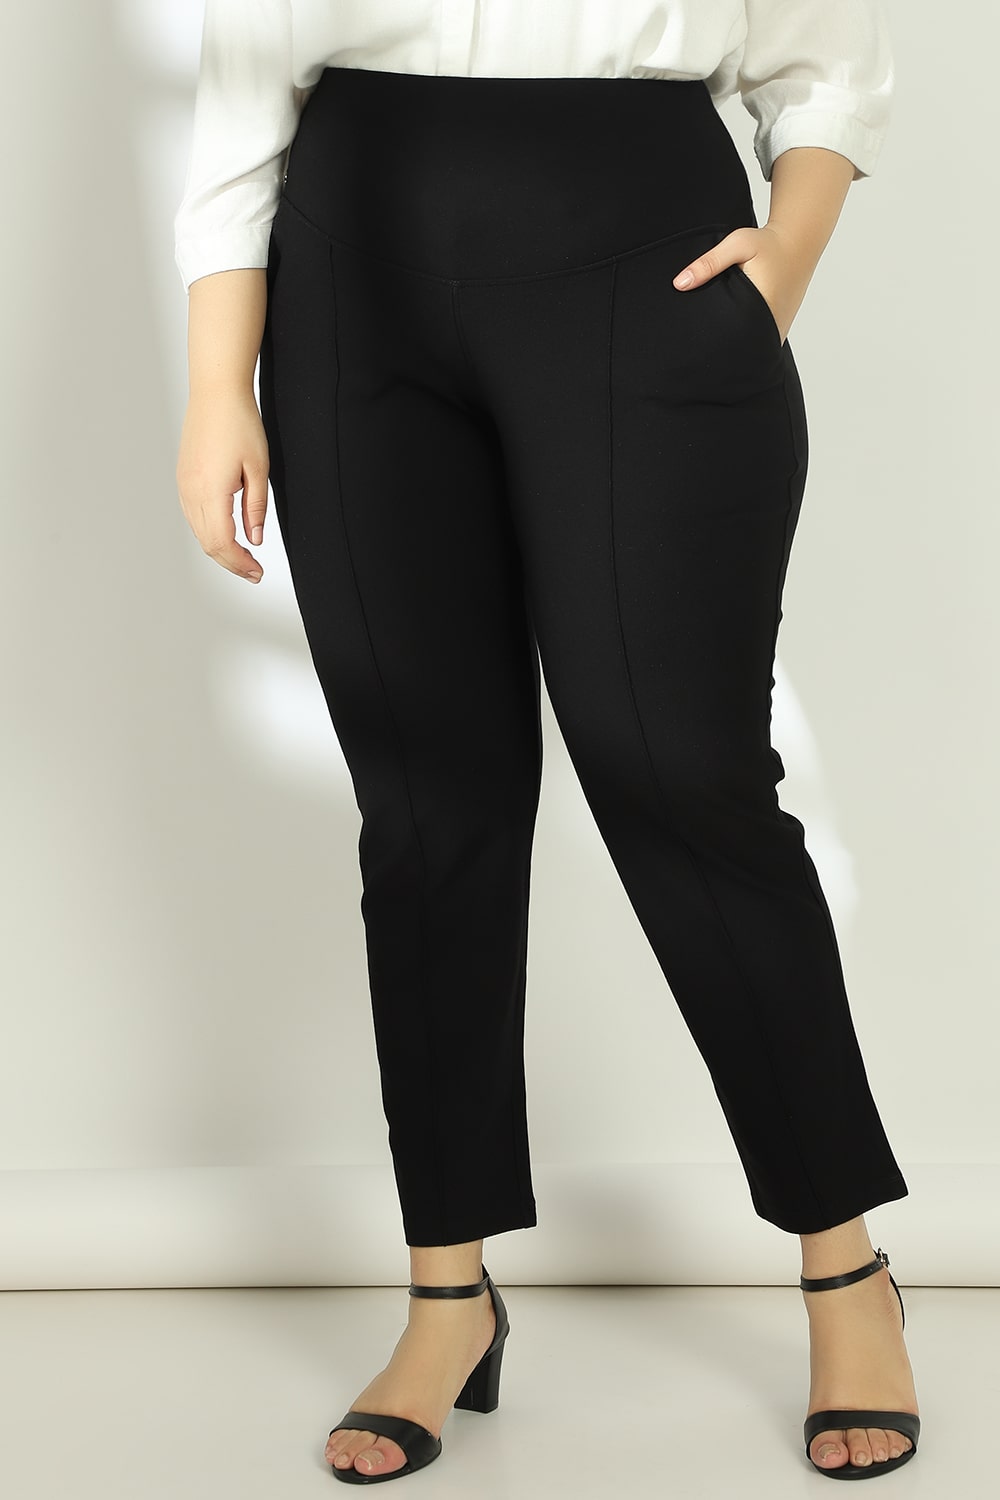 fashion trends every woman should own these trousers to elevate their  office style SKML